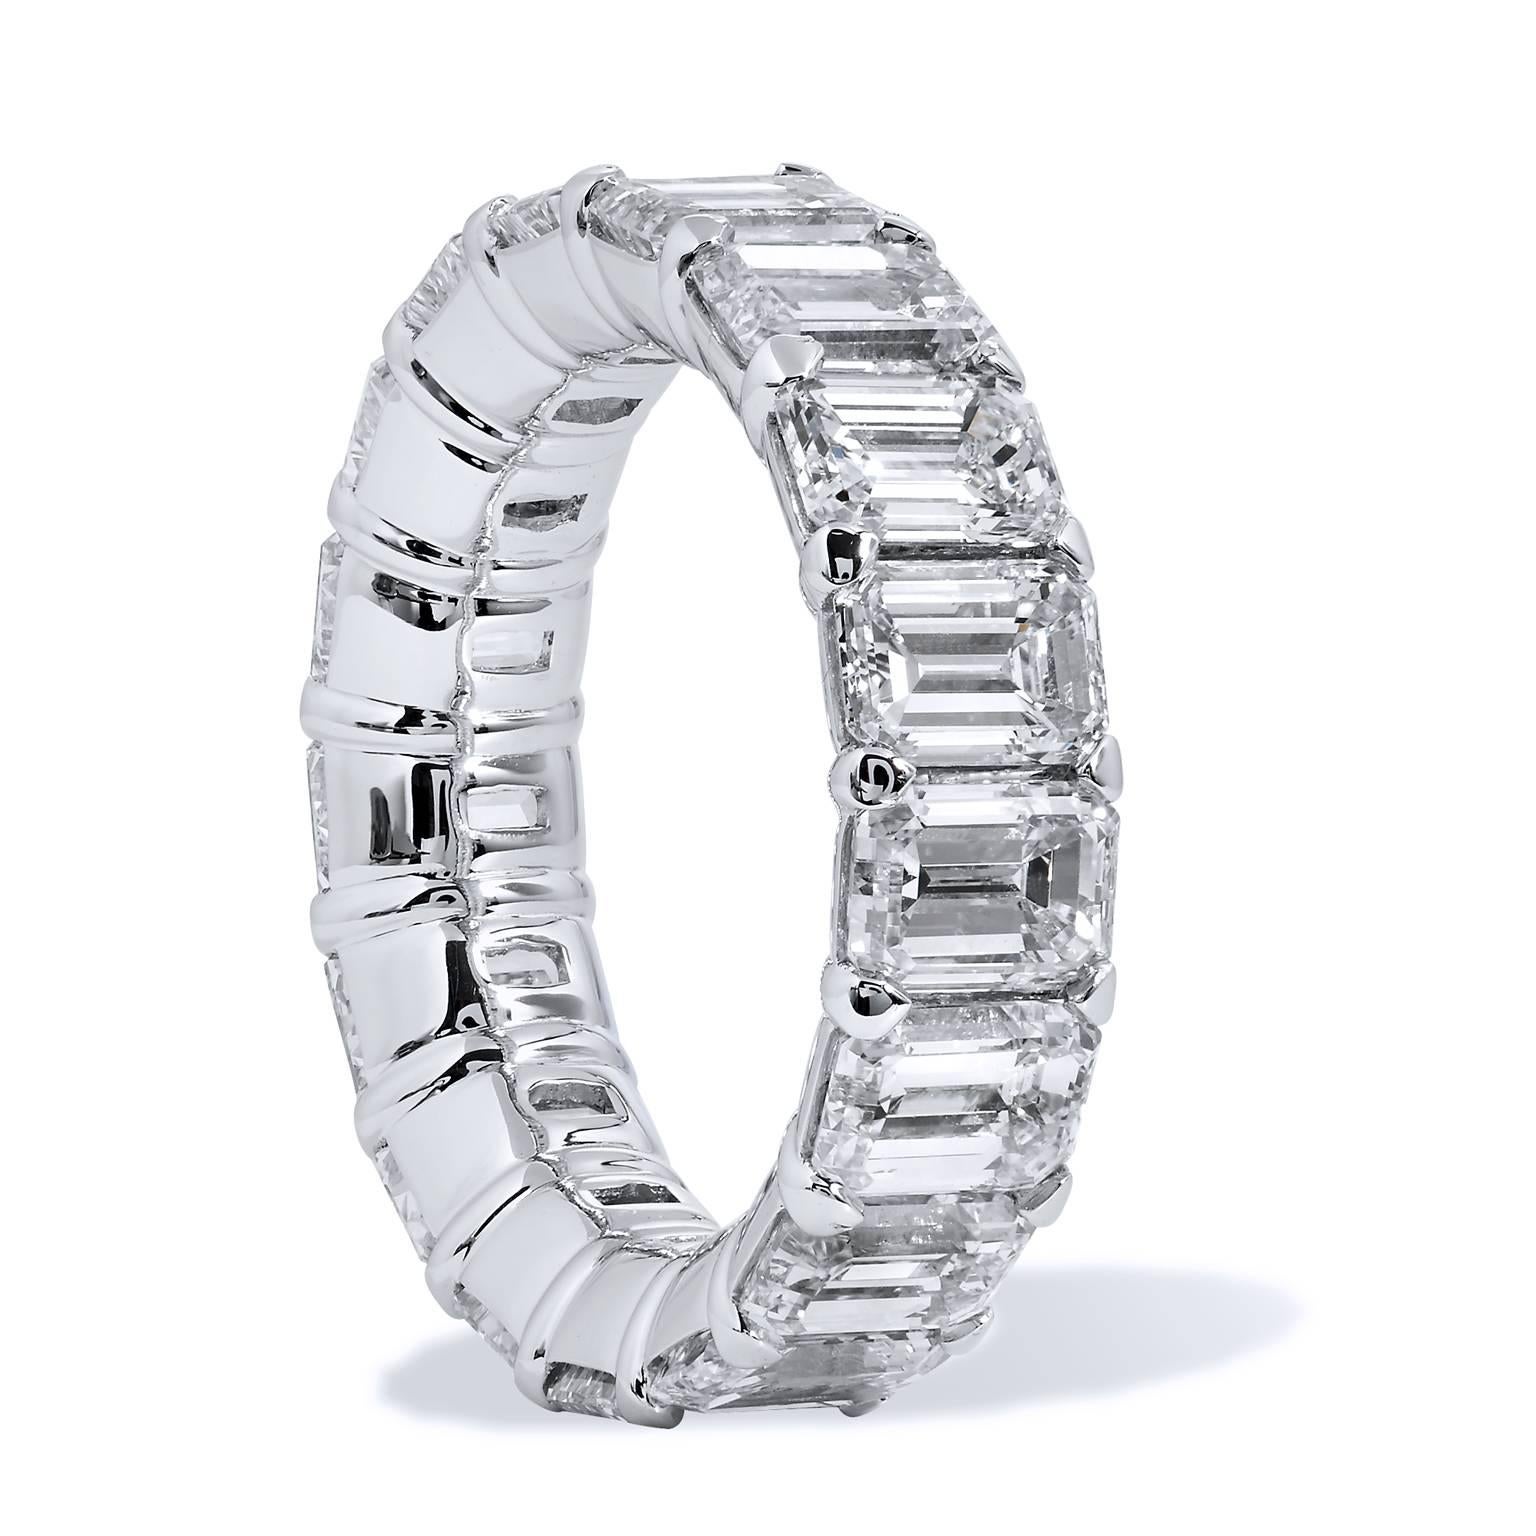 Seventeen emerald cut diamonds (G/VS), with a total weight of 9.92 carats, are affixed to a platinum shared-prong shank. This buttercup eternity band provides a spectrum of light and color that glinters with pristine beauty. A light that will light